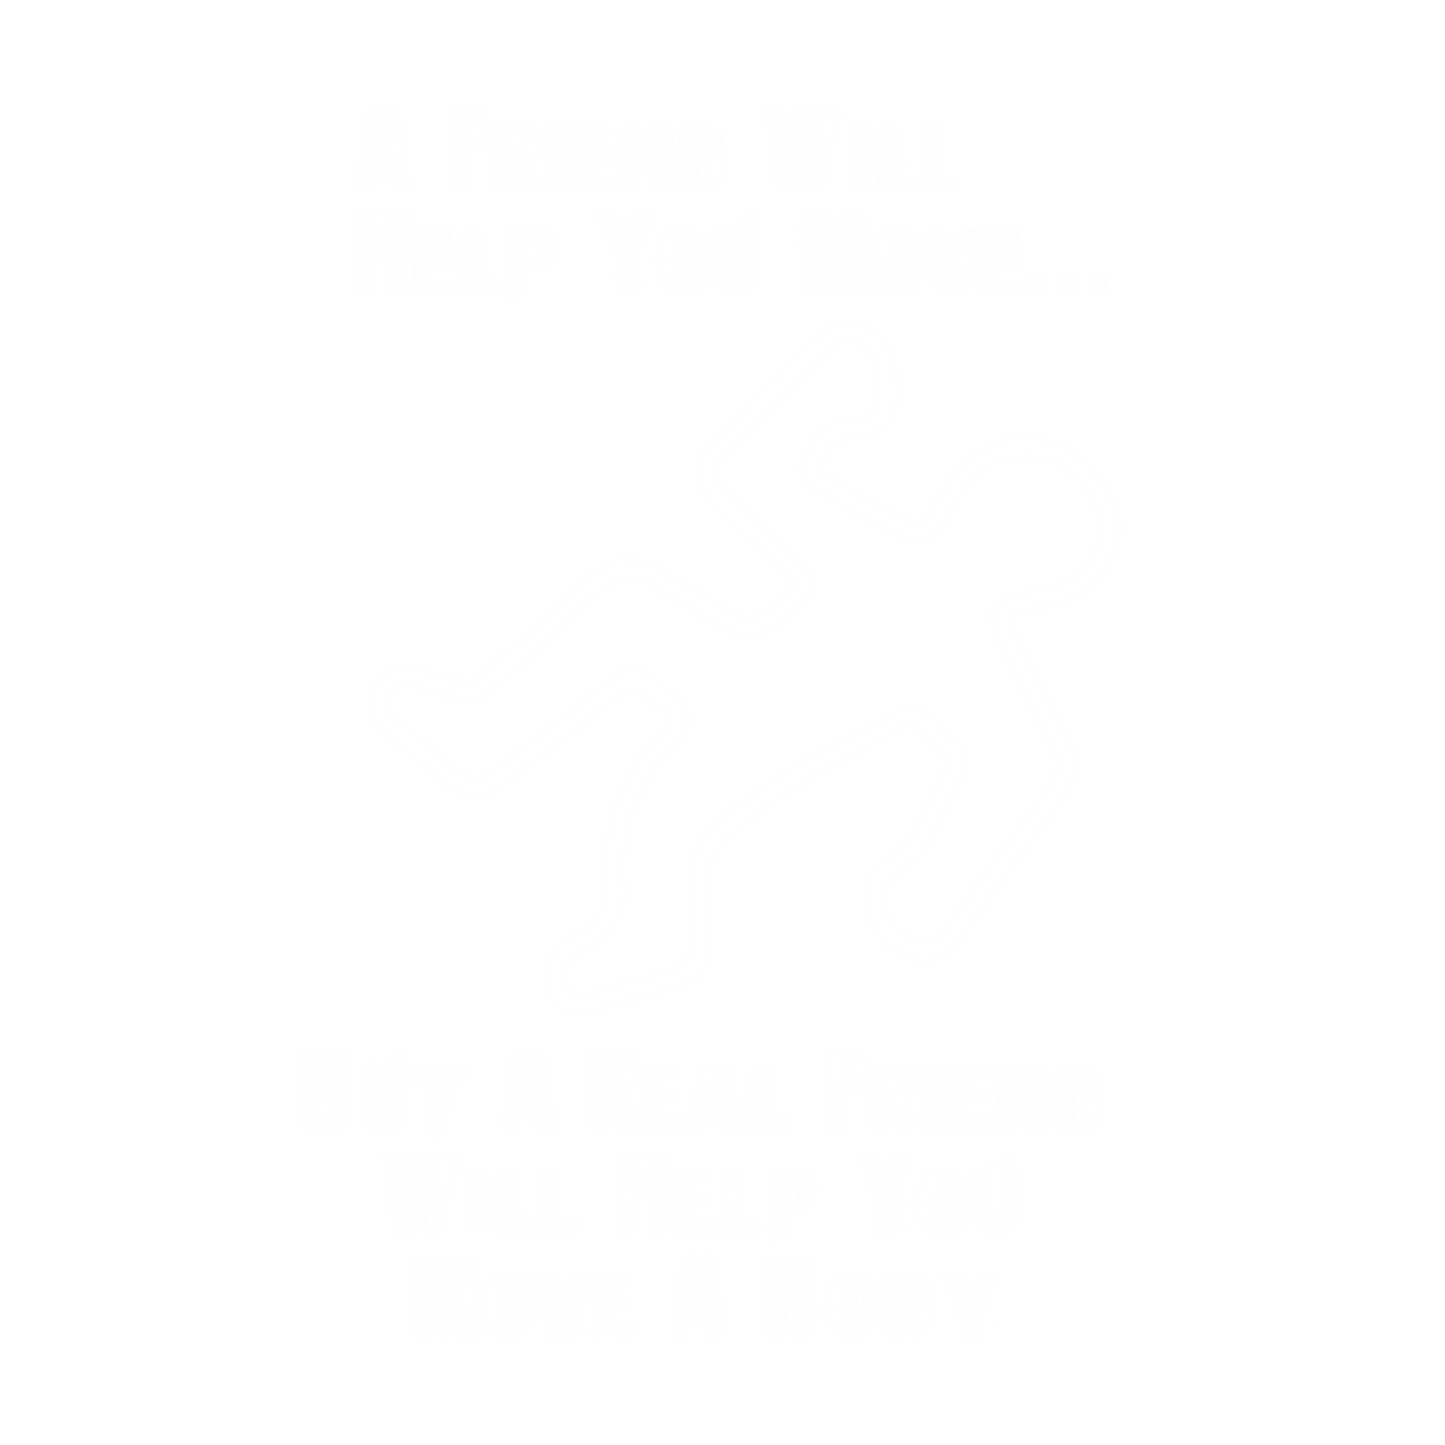 A Friend Will Help You Move… But A Real Friend Will Help You Move A Body